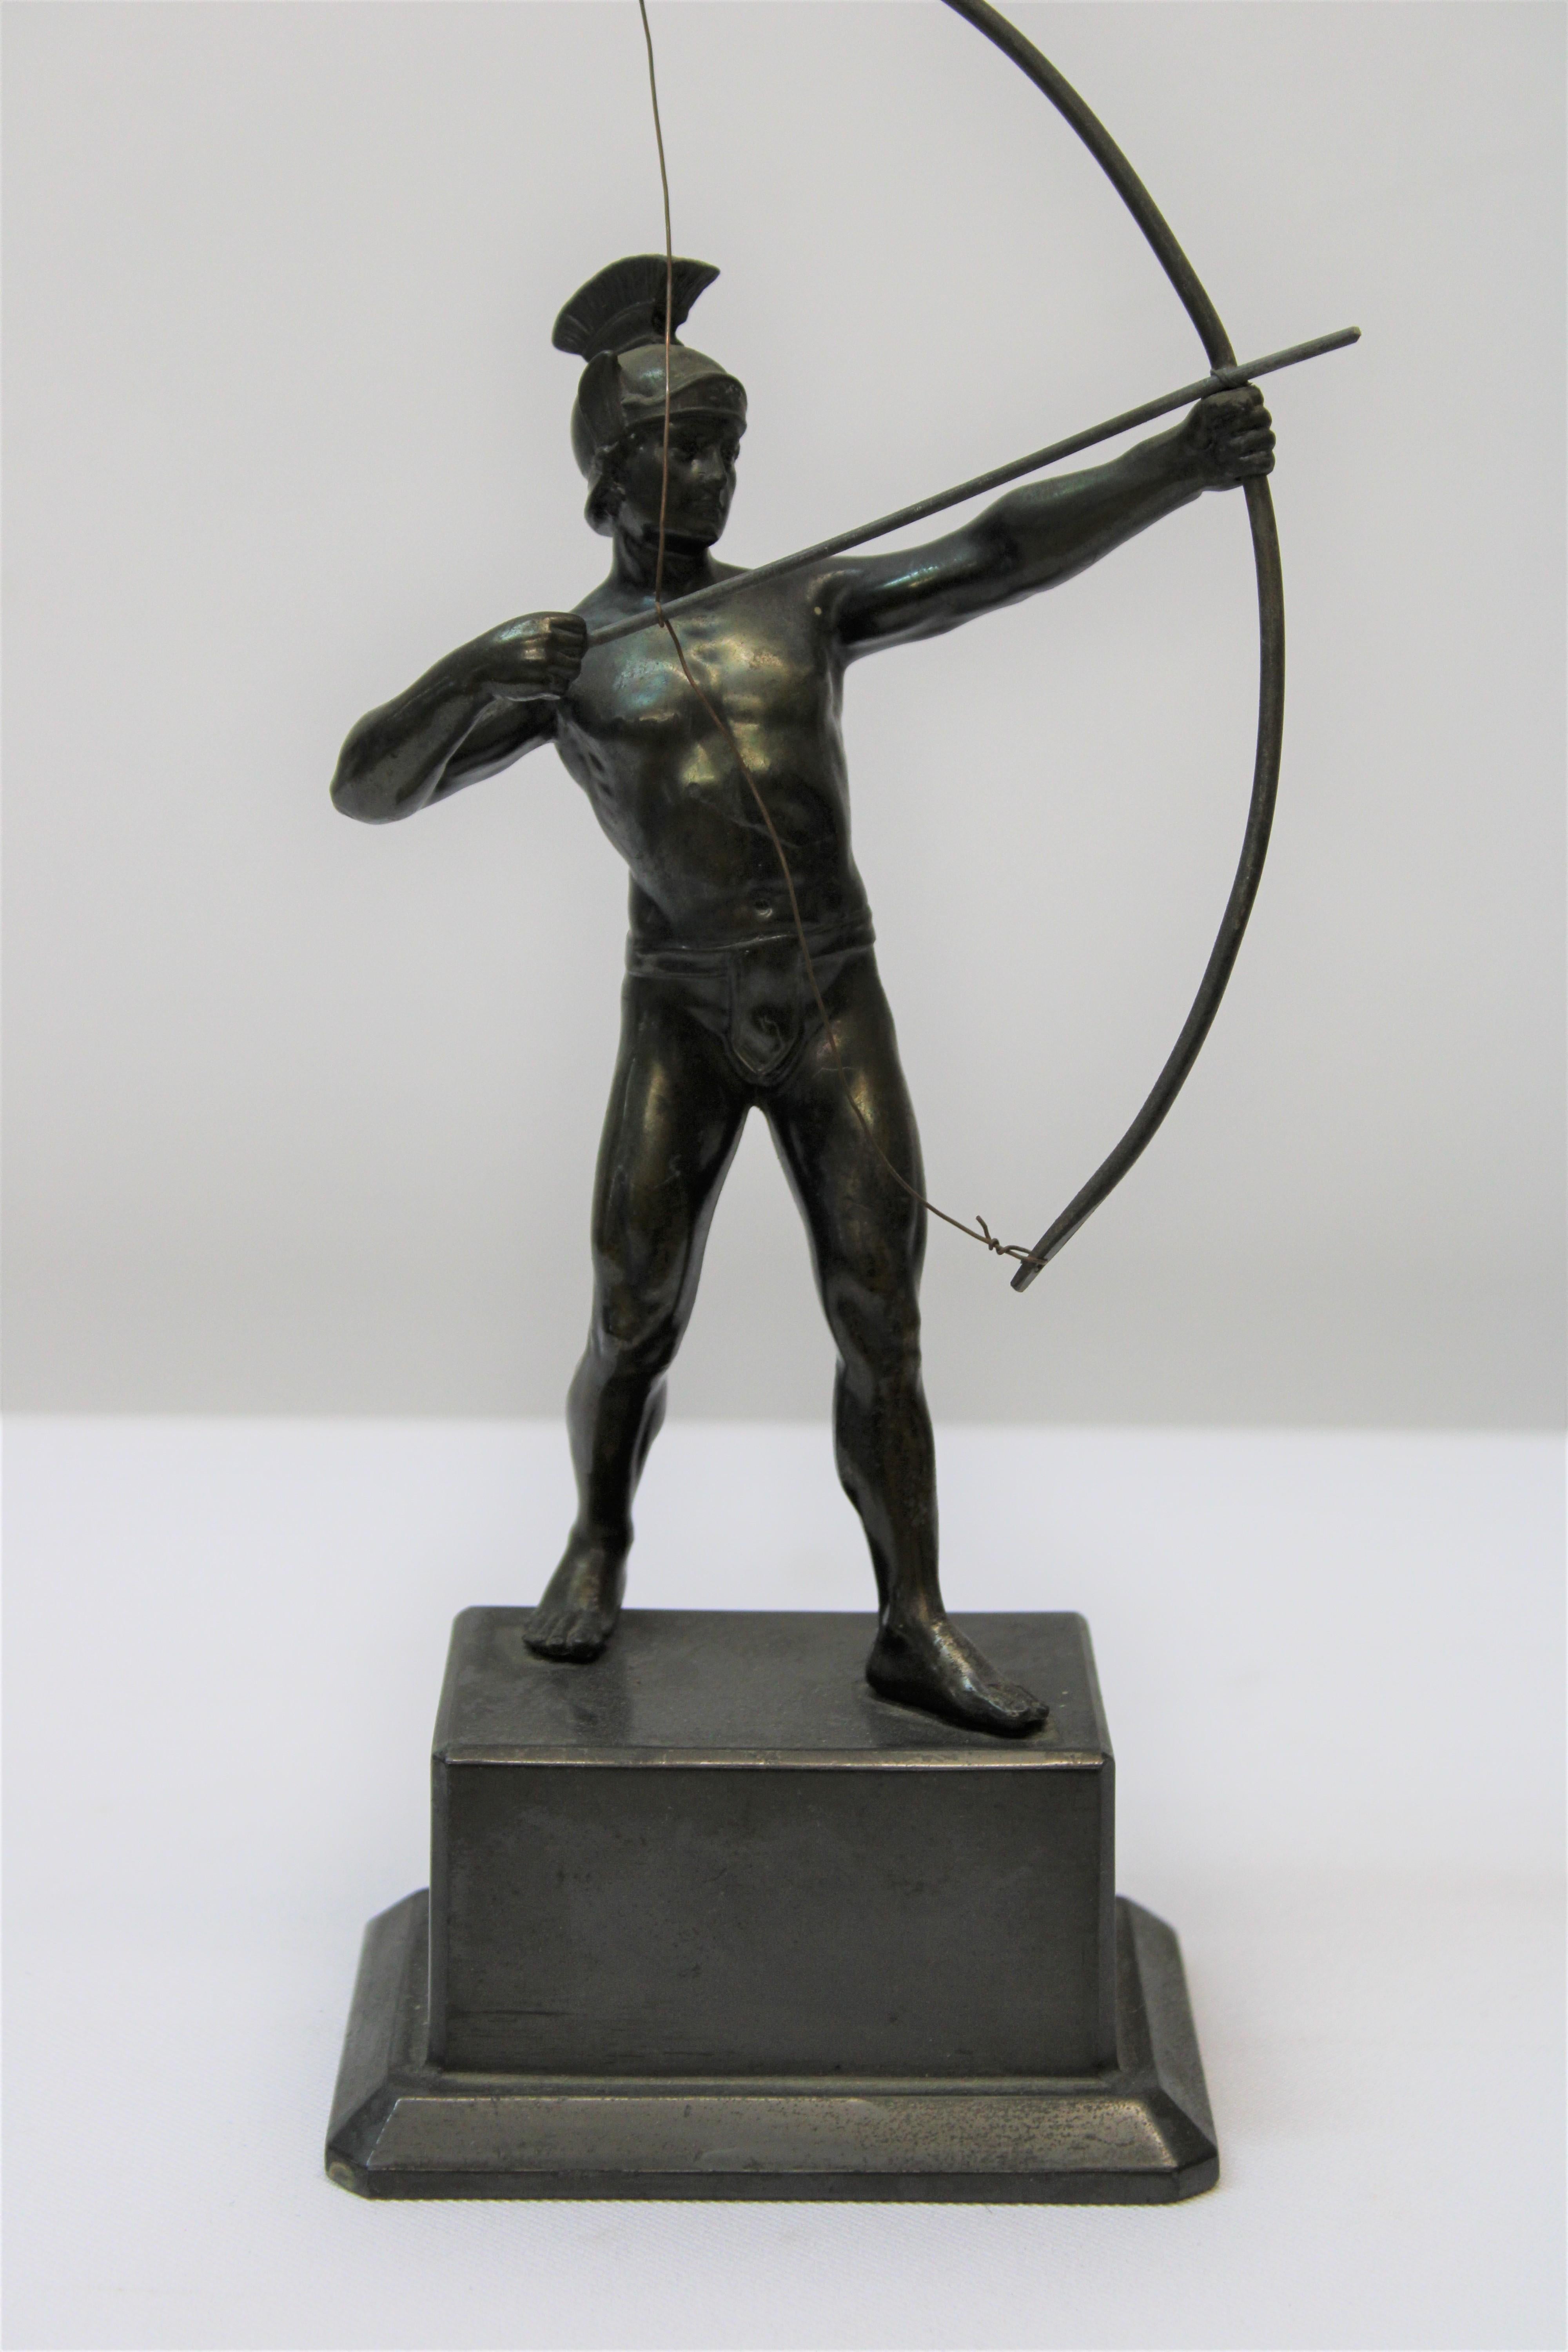 Late 19th-early 20th century bronze Roman archer sculpture in the style of Ernst Moritz Geyger

5